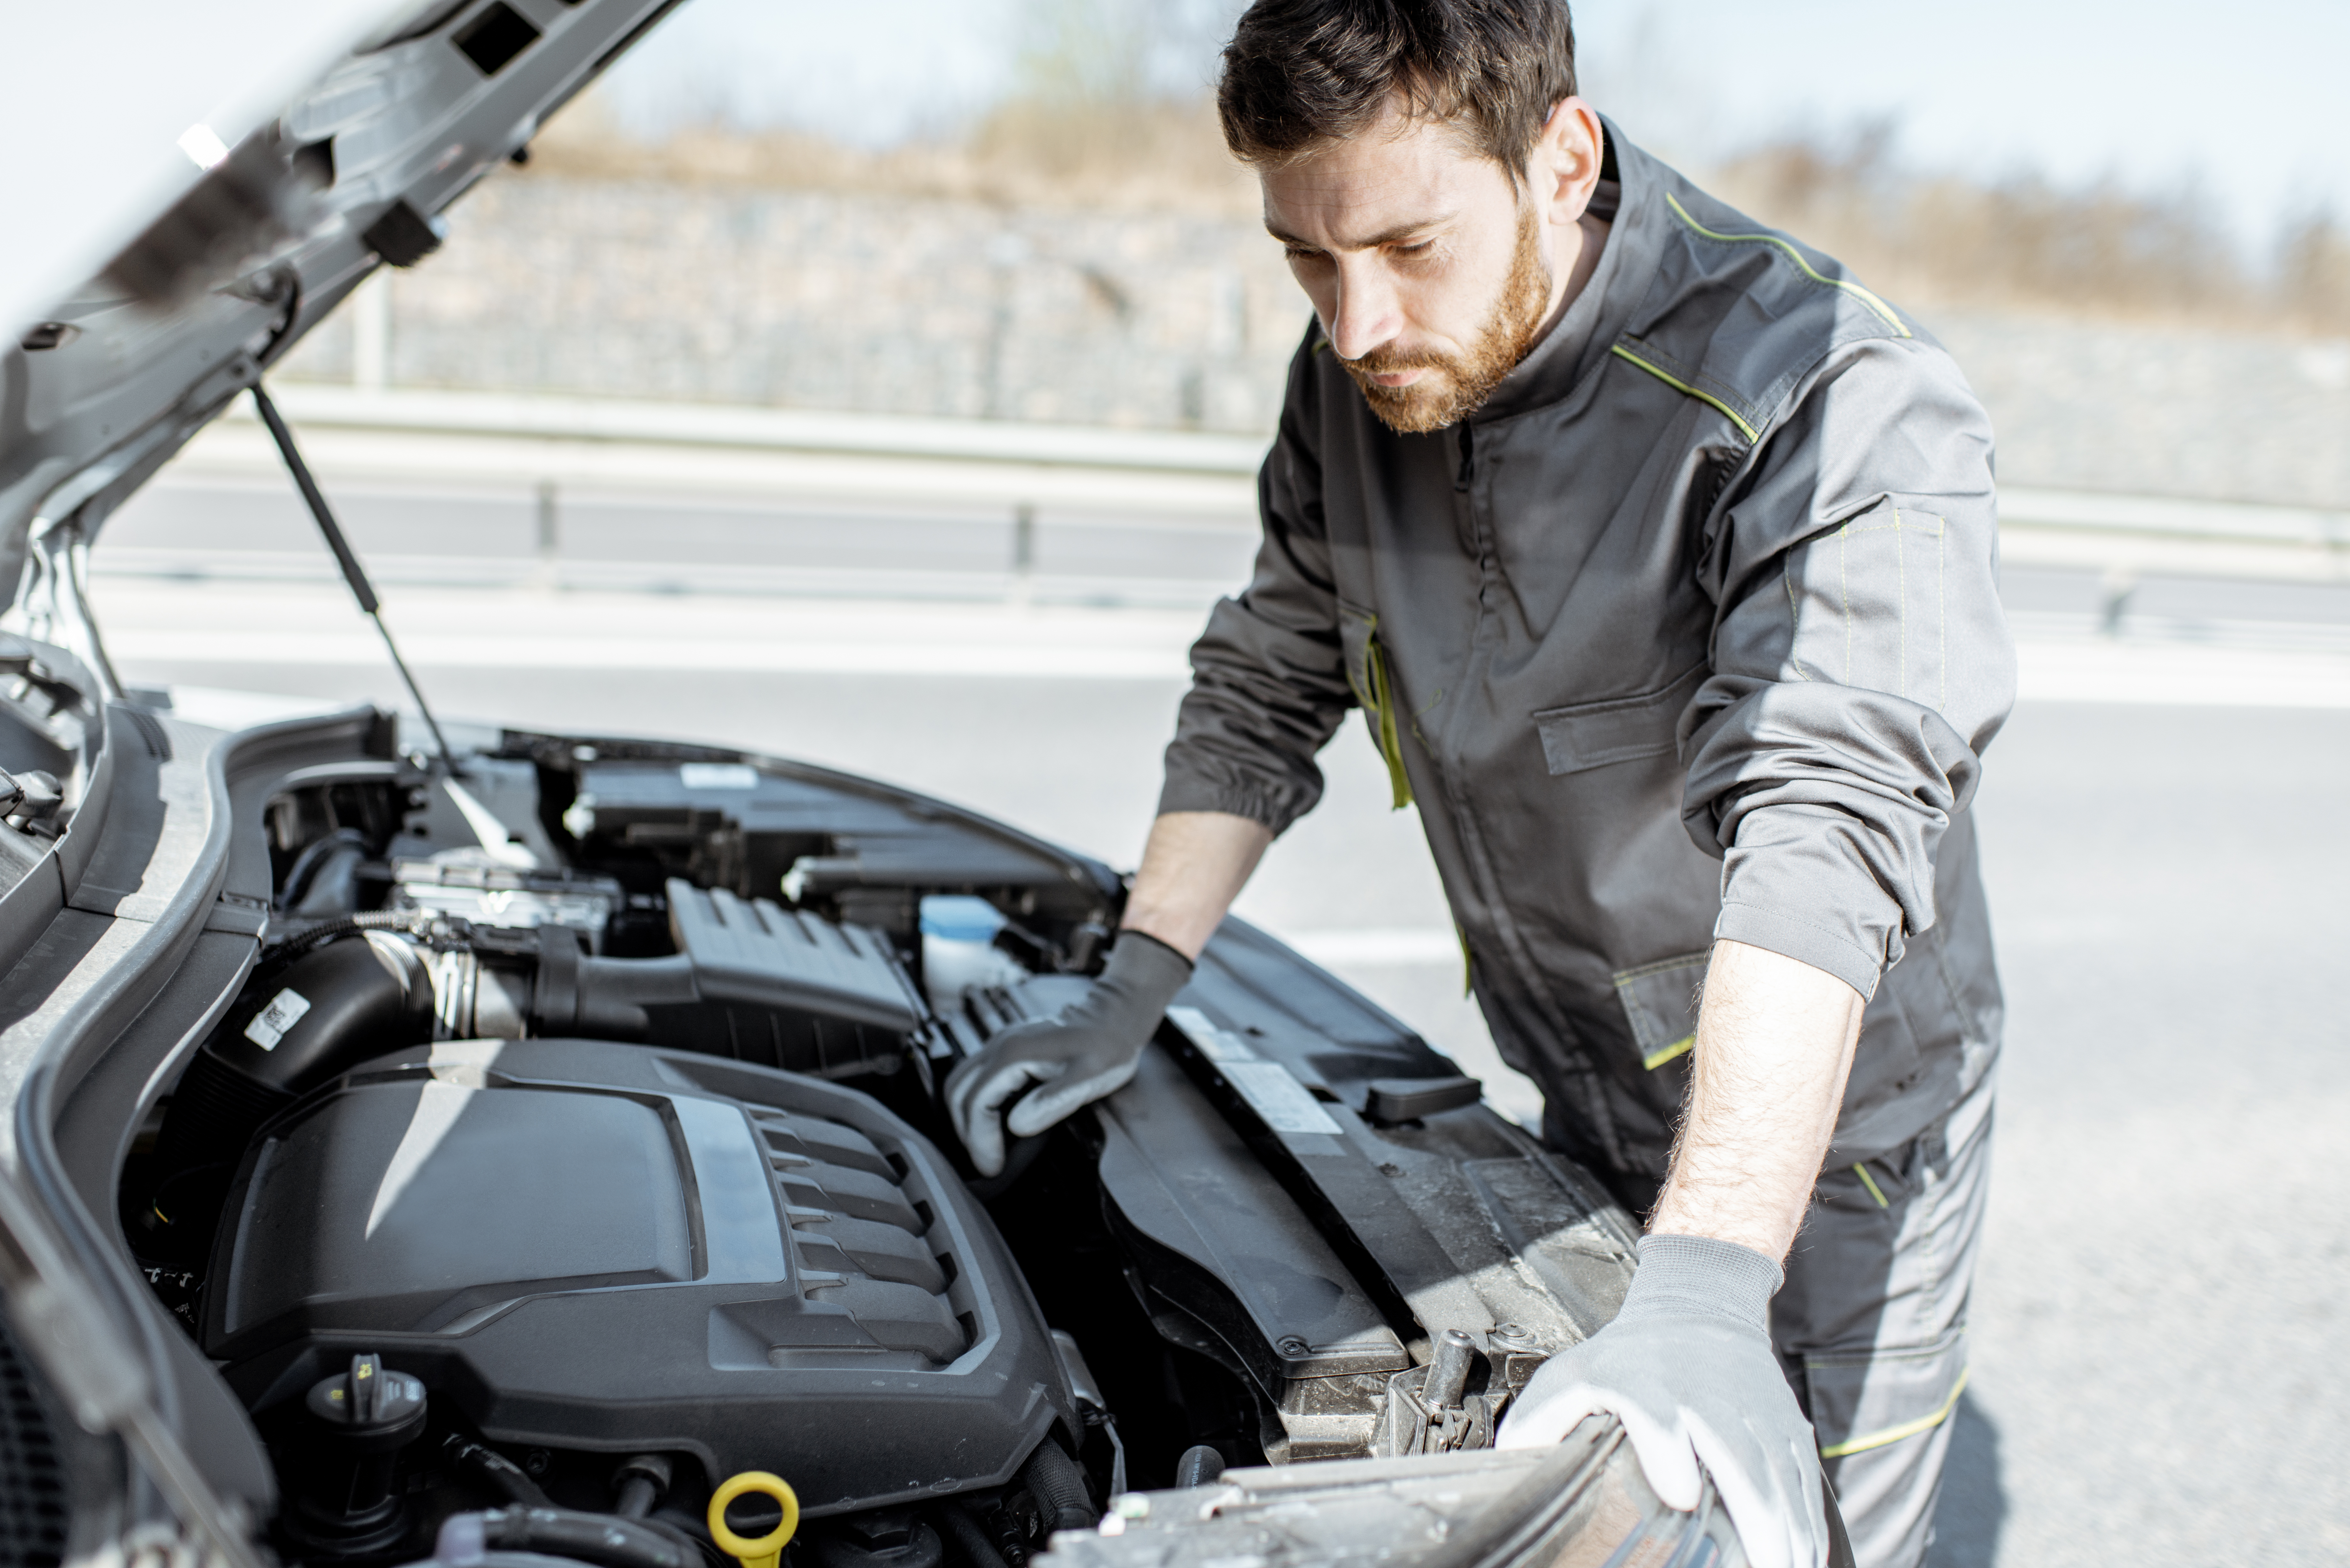 DISRUPTION IN THE CAR REPAIR AND MAINTENANCE INDUSTRY: THE RISE OF MOBILE OFFERINGS AND VALET SERVICES